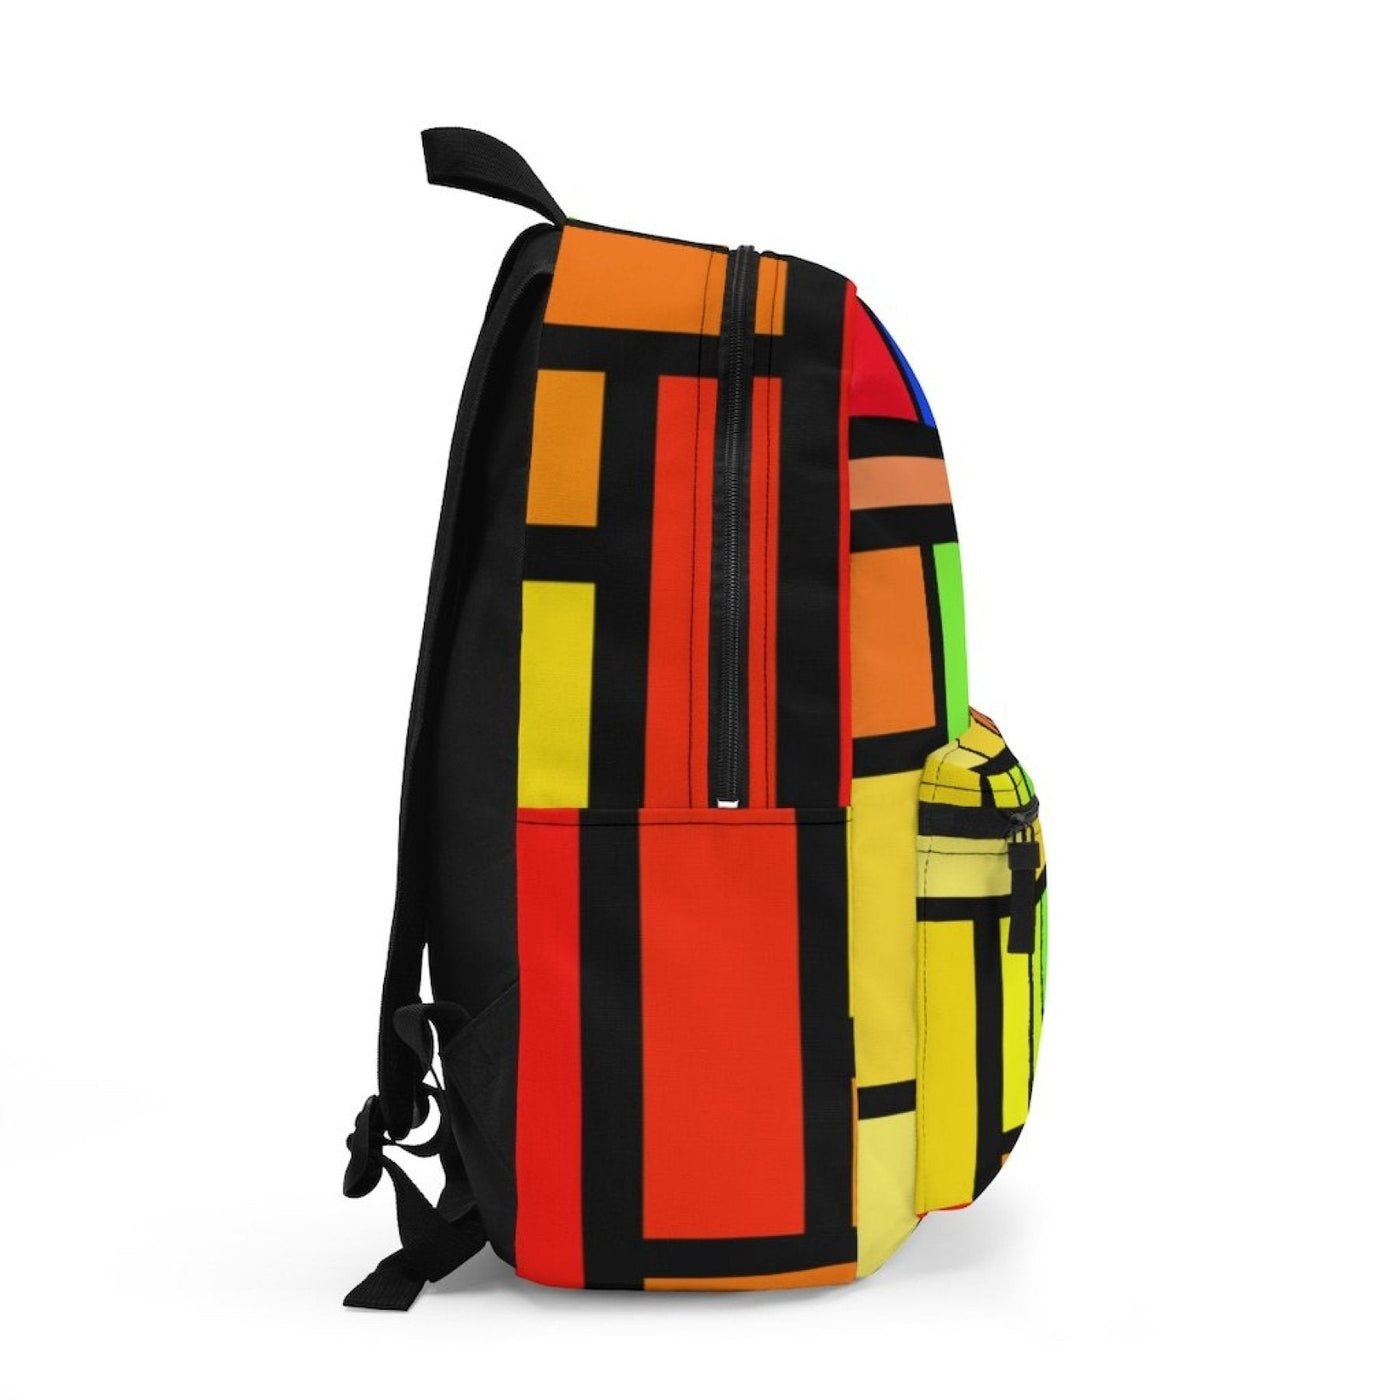 Backpack - Large Water-resistant Bag Red Blue Yellow Multicolor Colorblock -